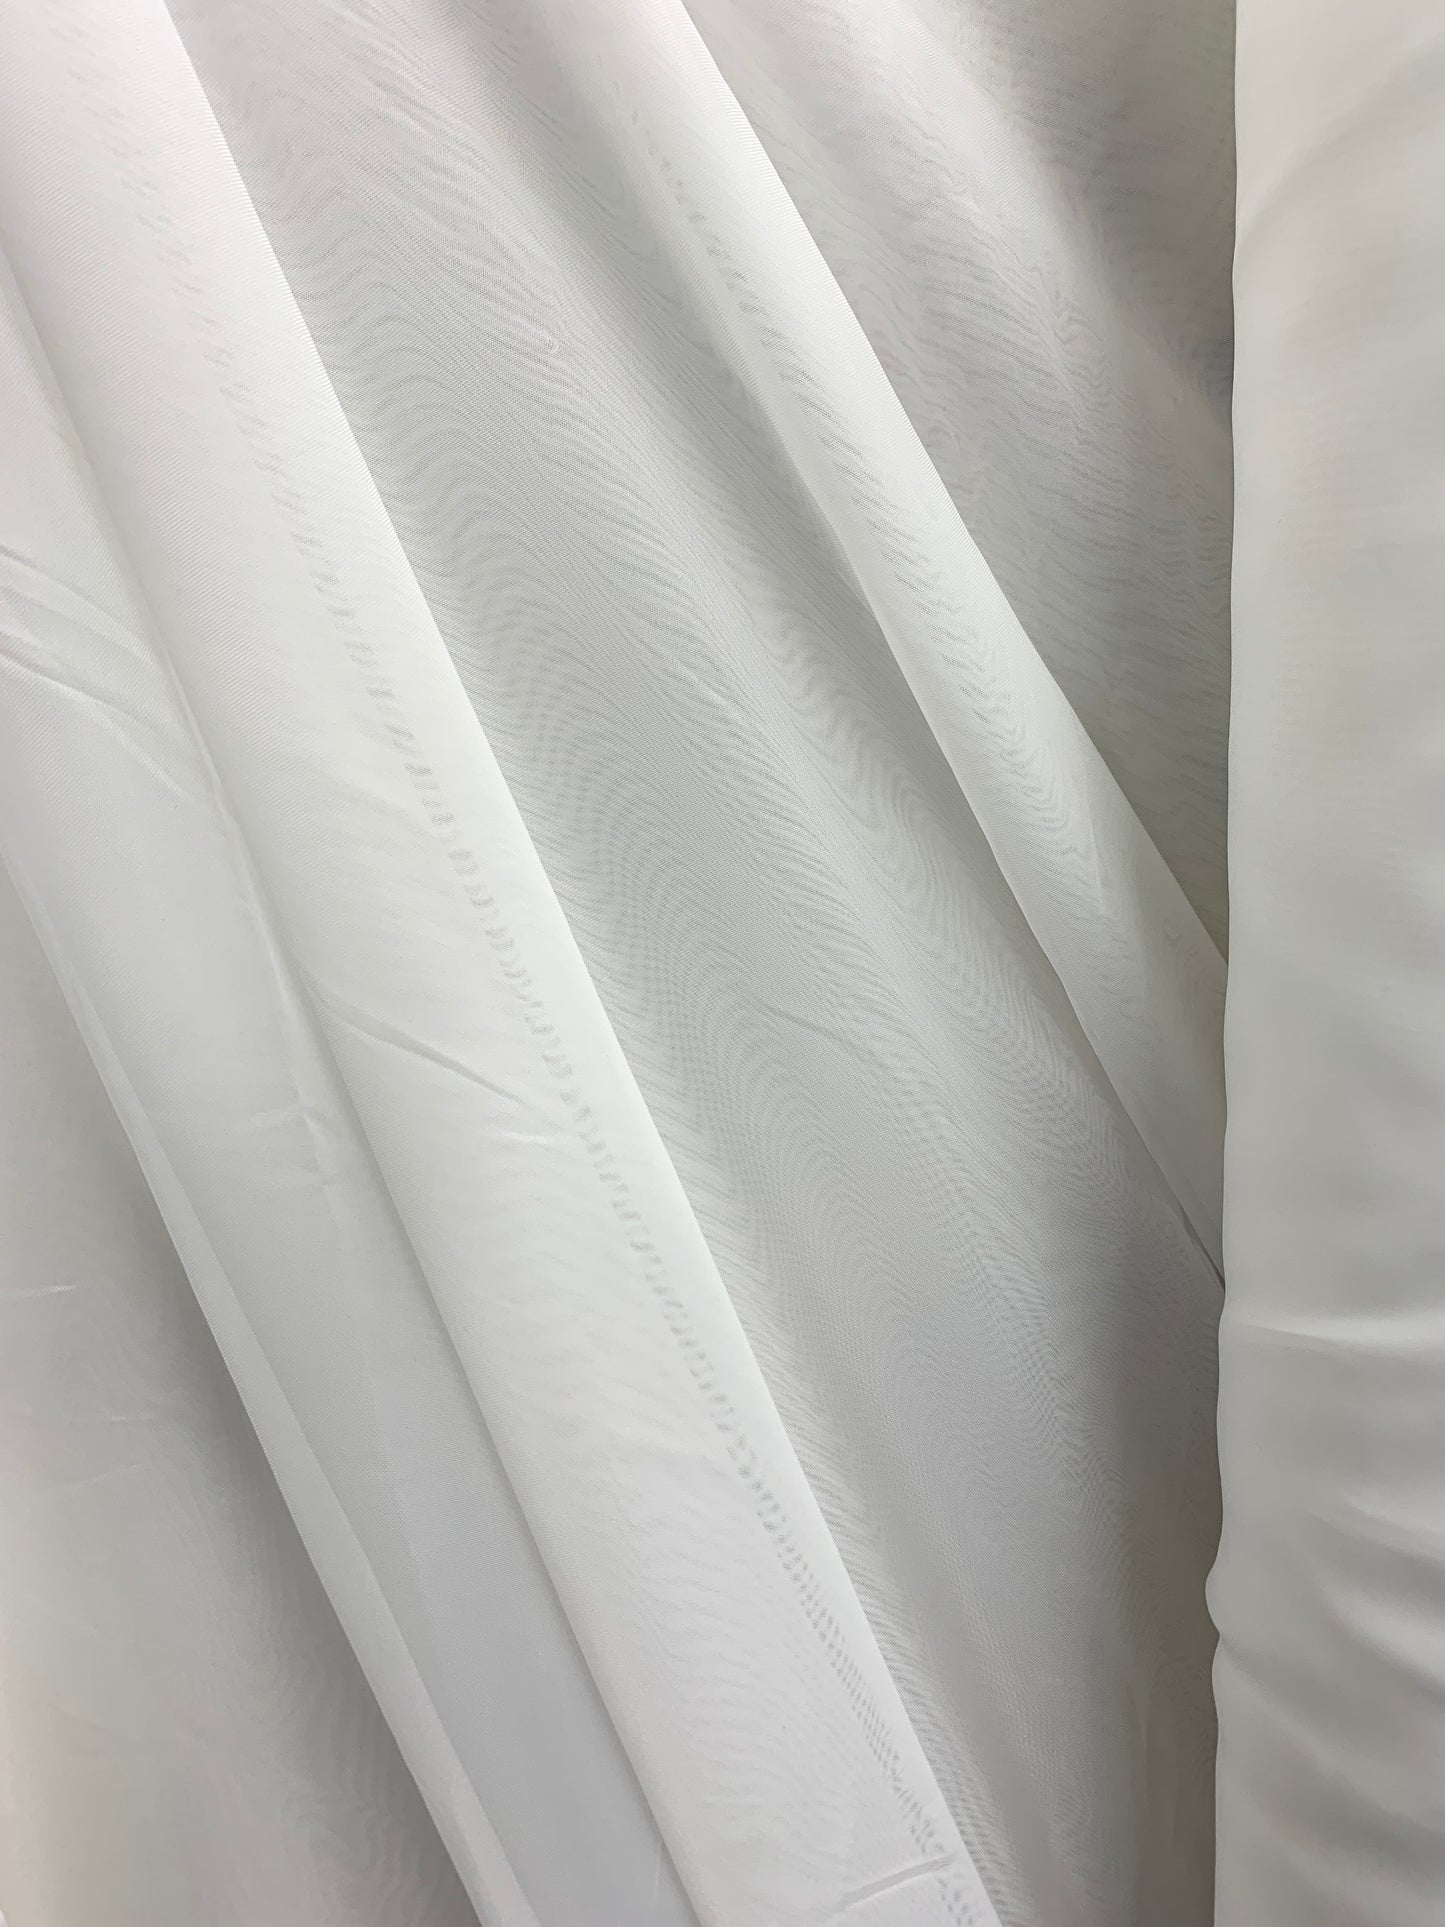 MILK WHITE Sheer Voile Polyester Drapery Apparel Fabric (118 in.) Sold By The Yard